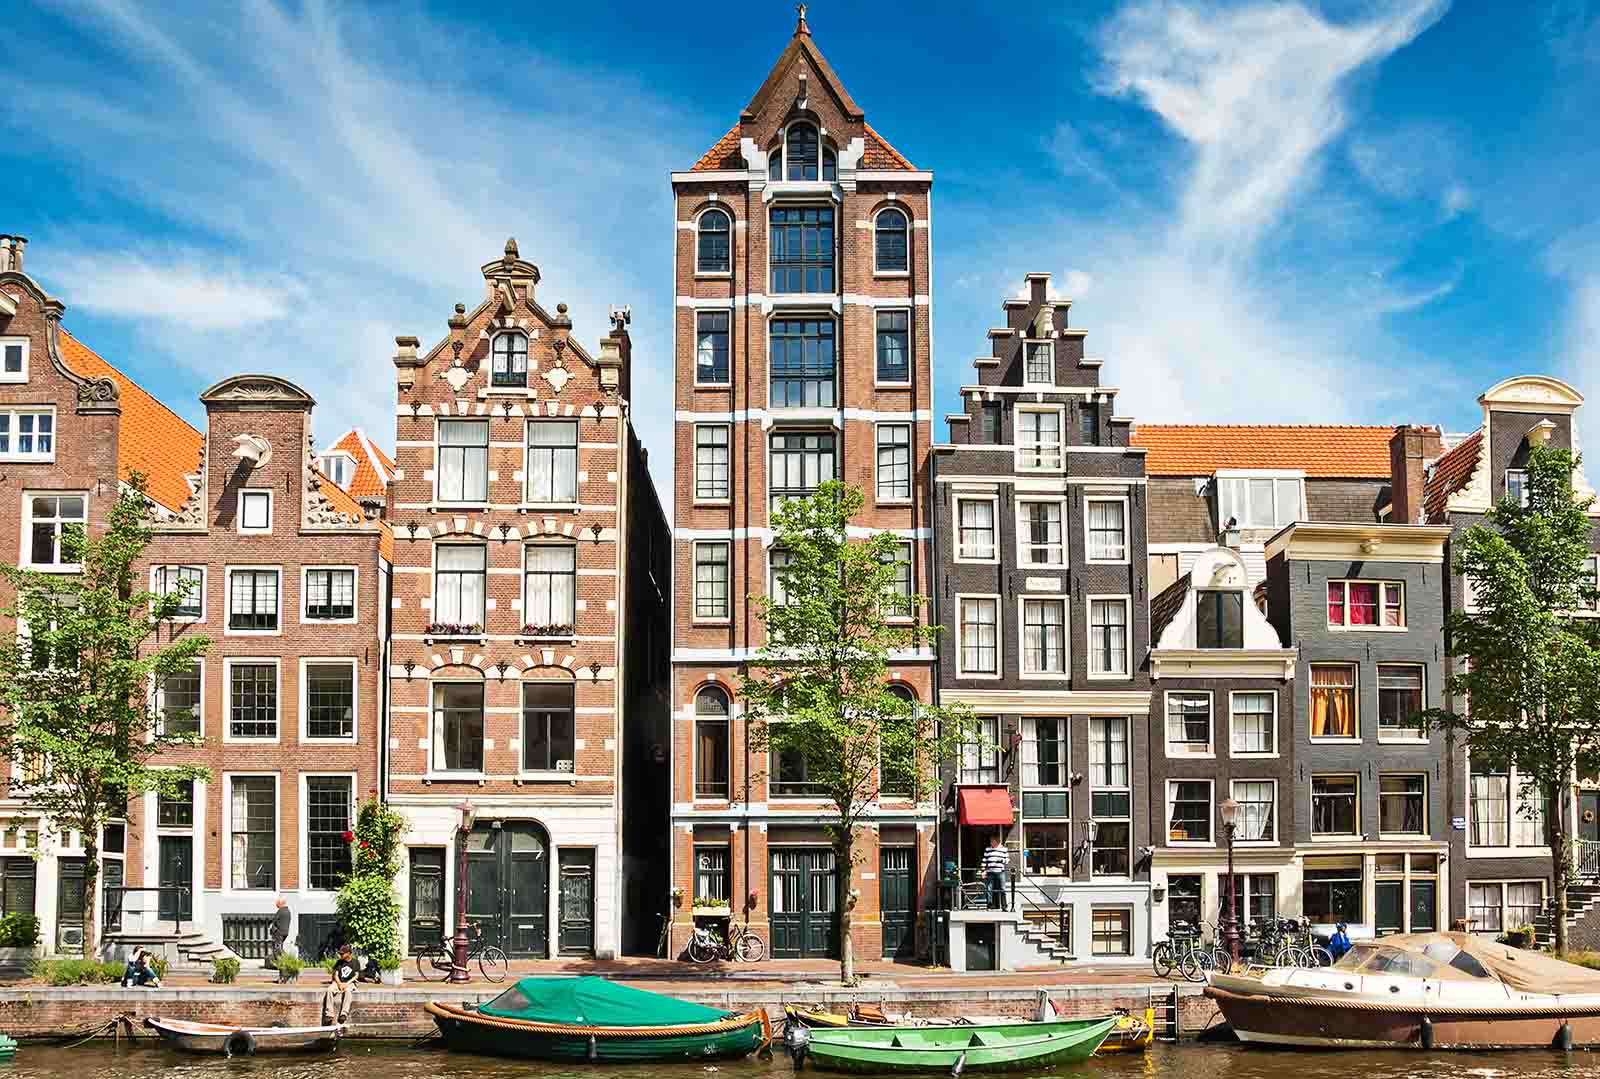 Canal houses in Amsterdam | Exploring Amsterdam by bike